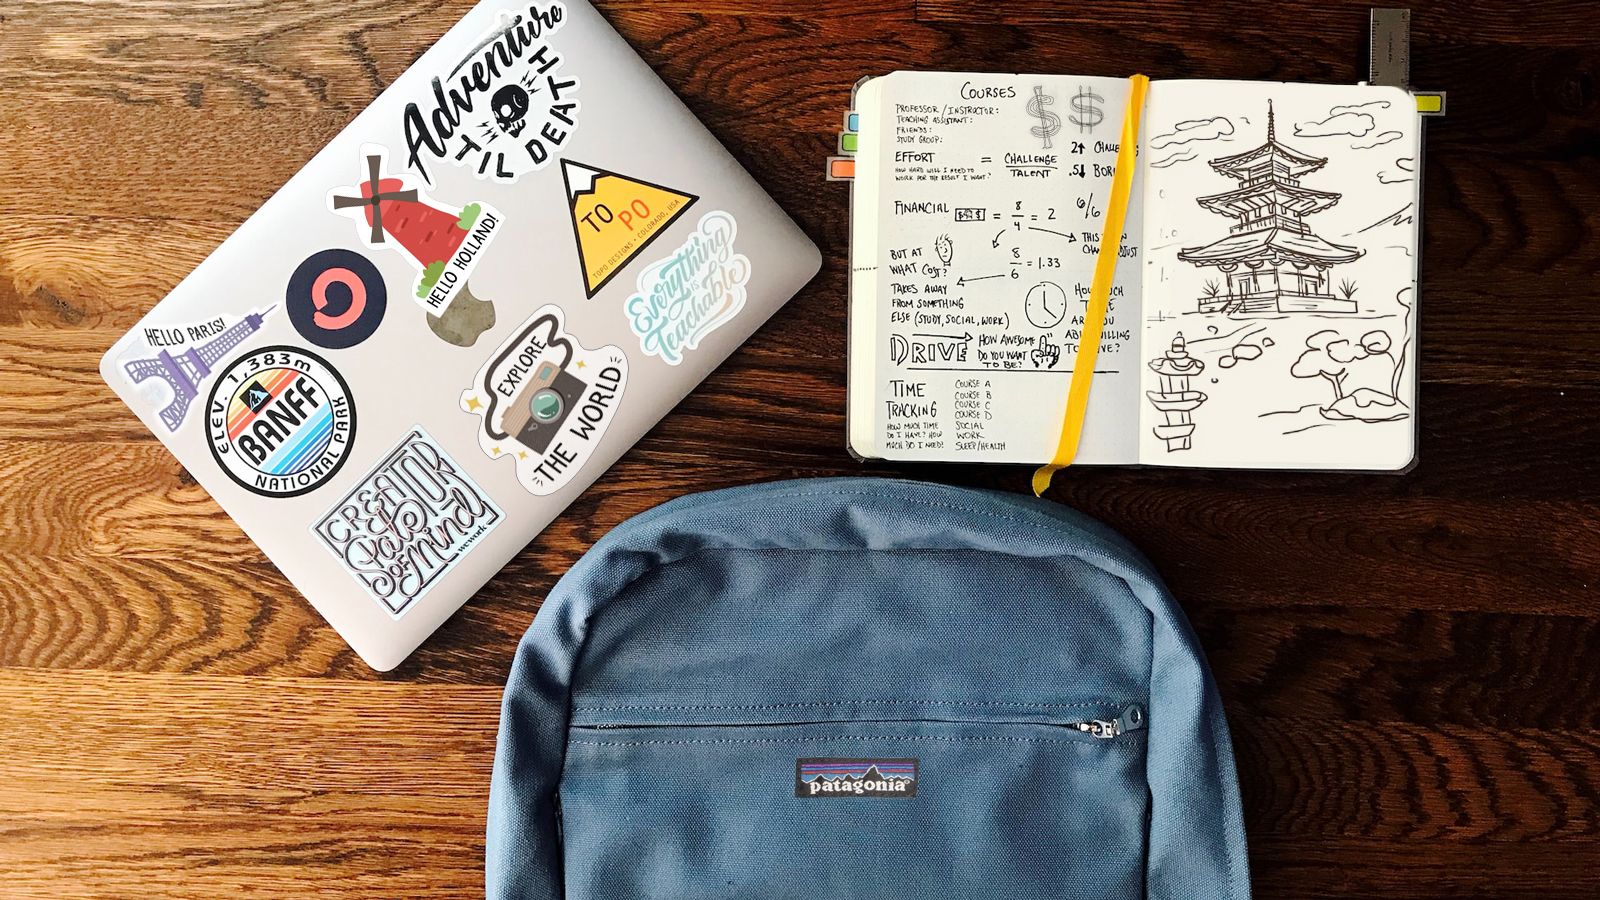 Photo - Laptop covered with travel stickers sits on a table next to a backpack, and a journal with notes and sketches of dollar signs and a pagoda.